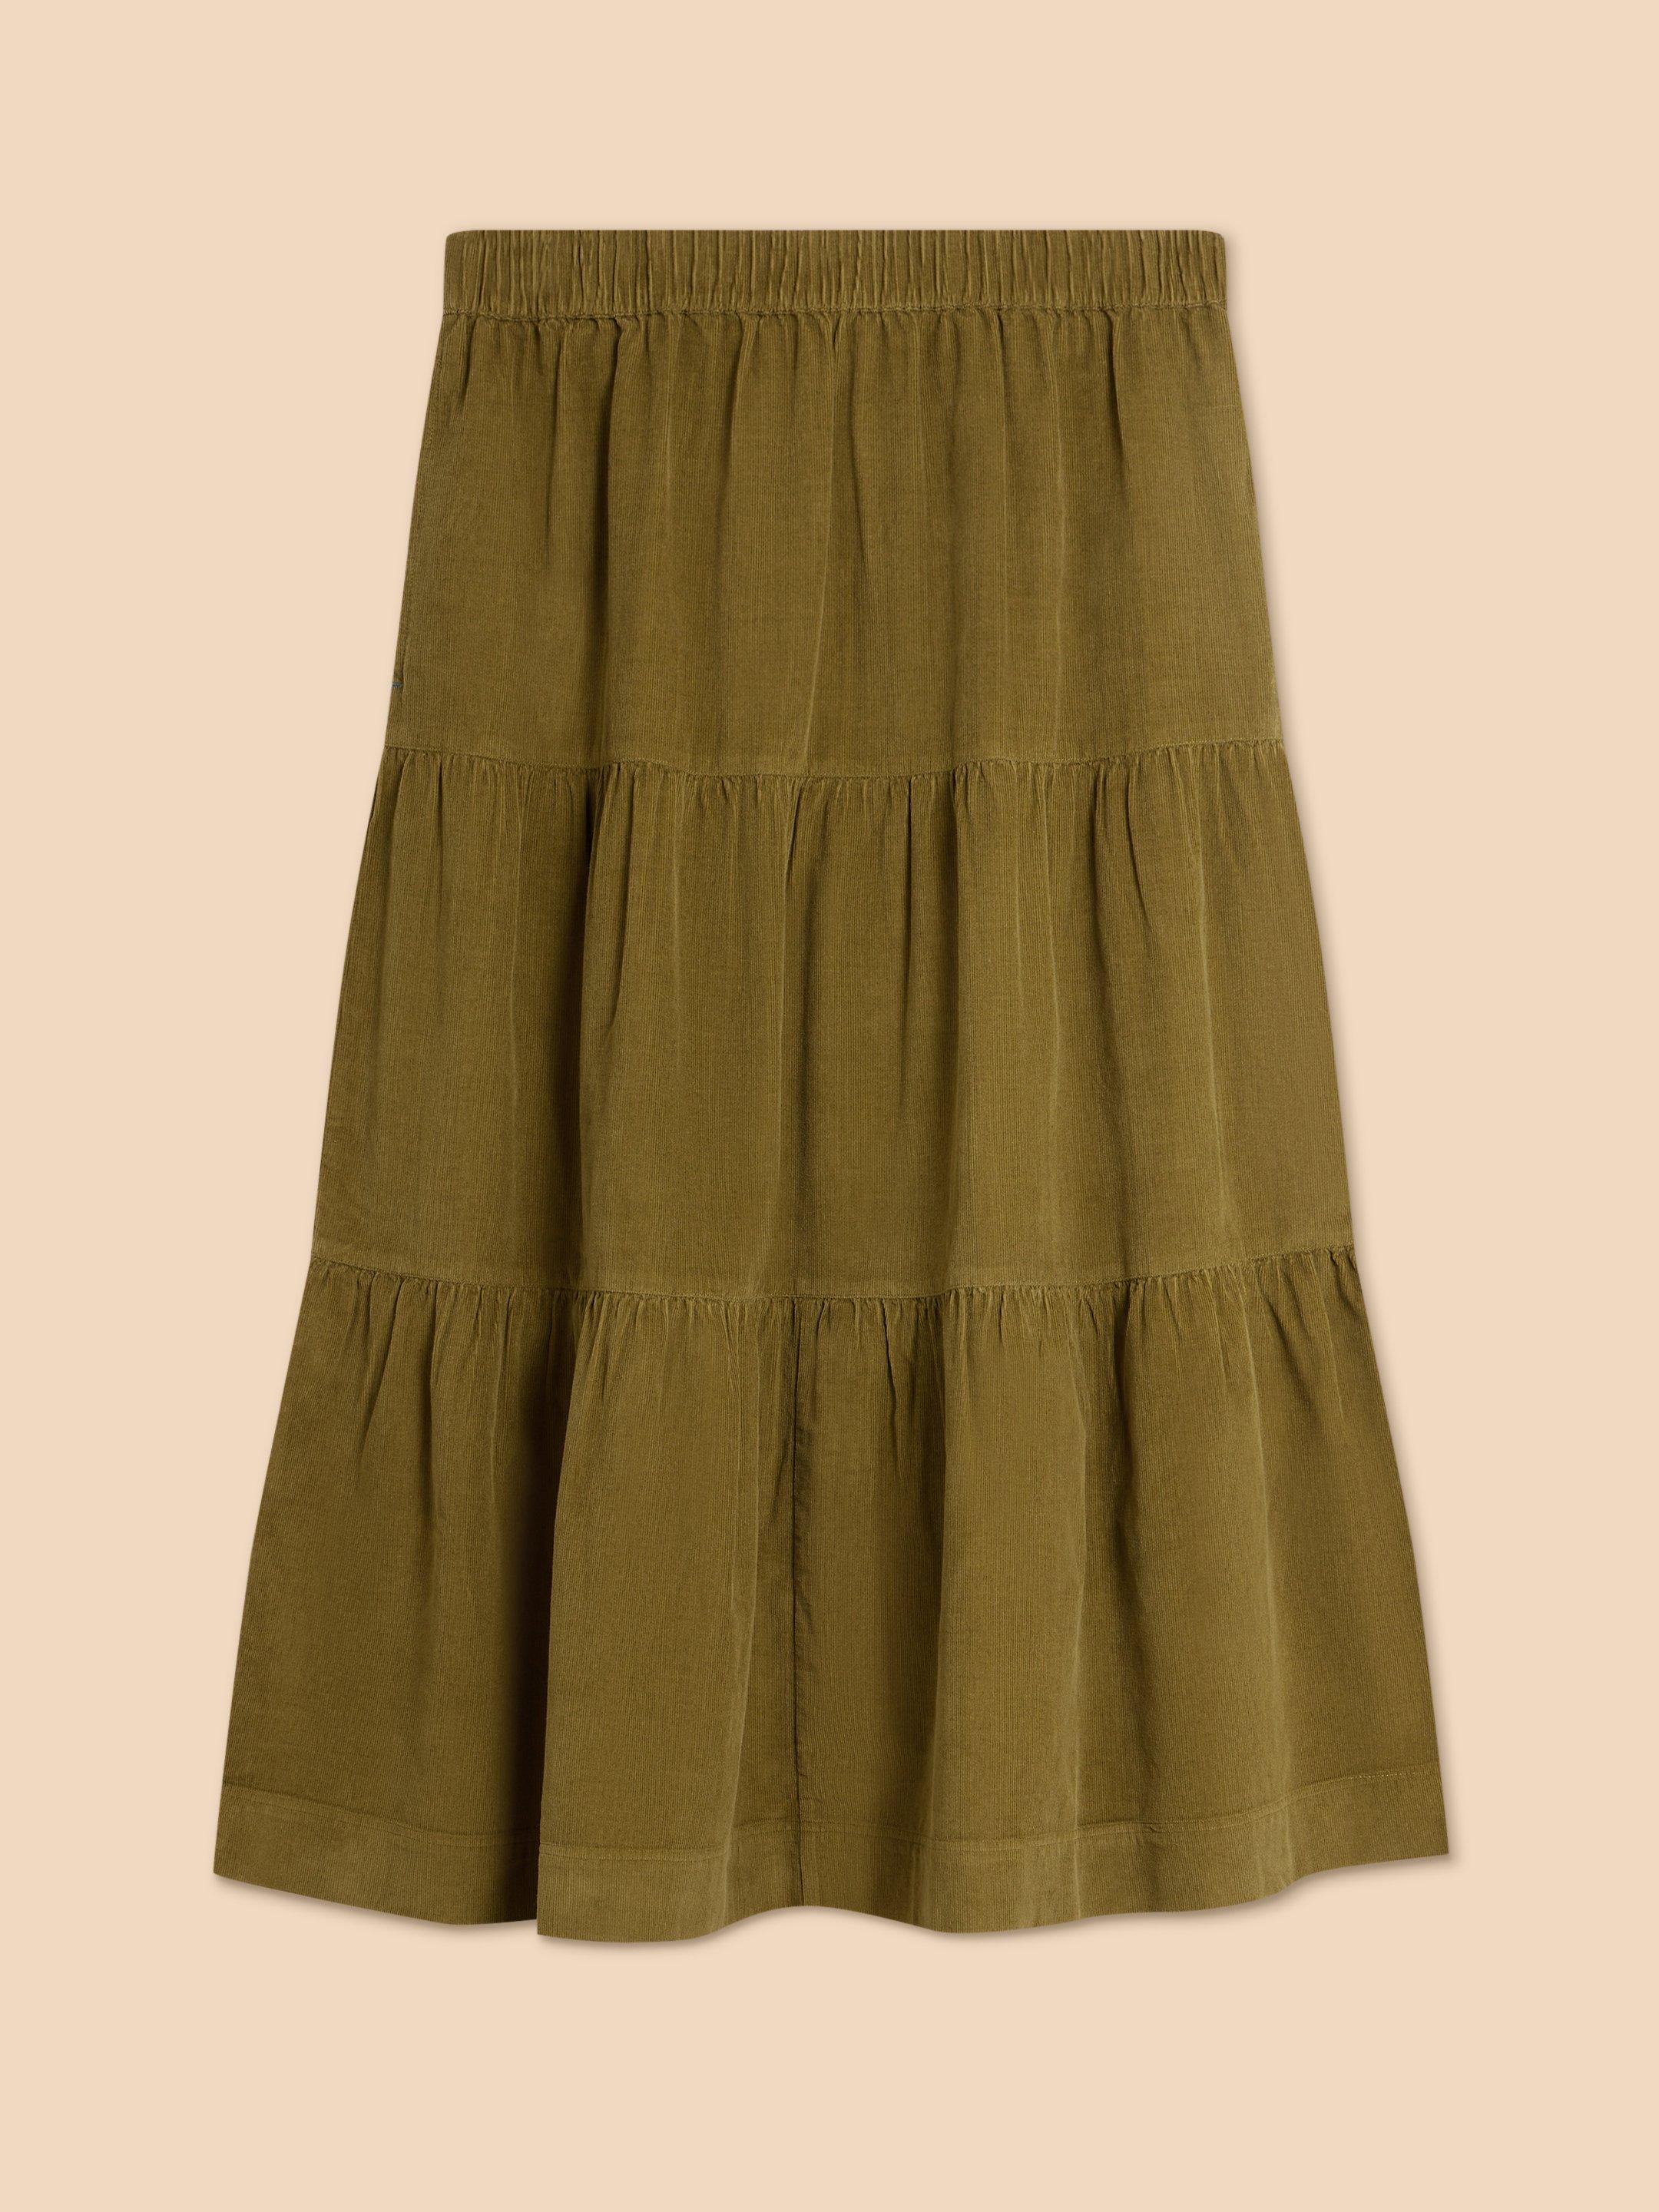 Jade Tiered Cord Skirt in MID CHART - FLAT FRONT